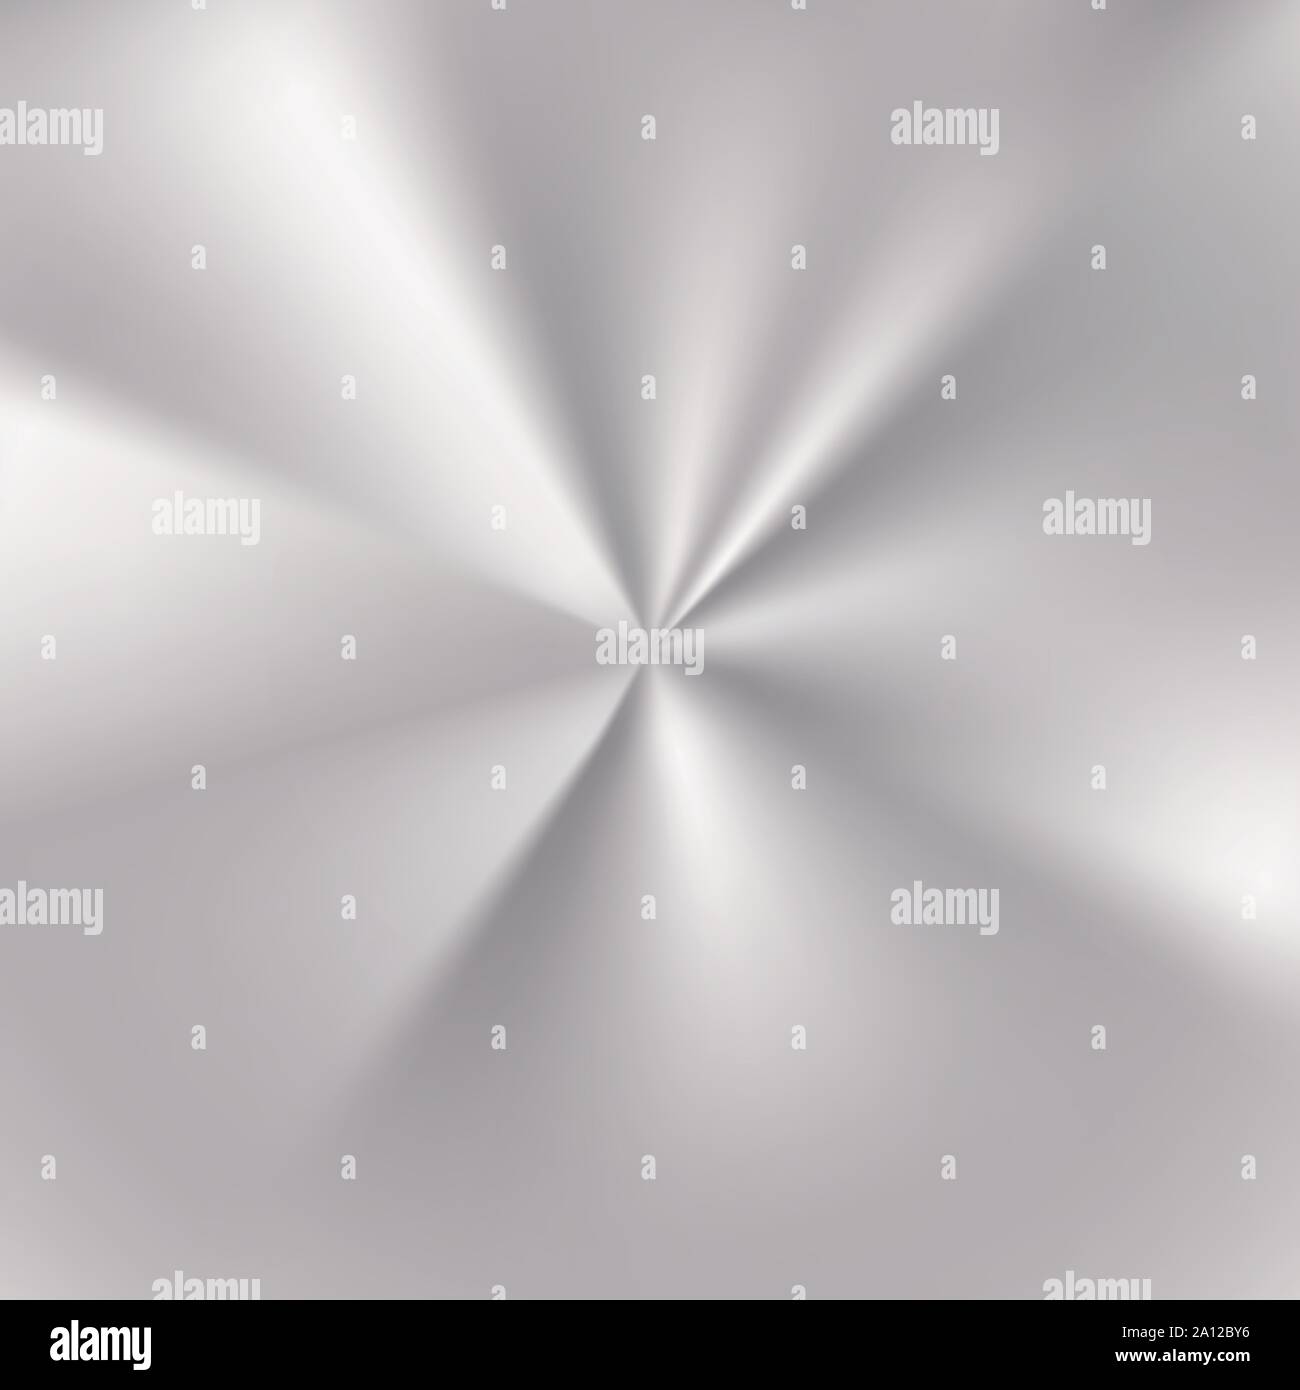 Silver foil background metal gradient Royalty Free Vector